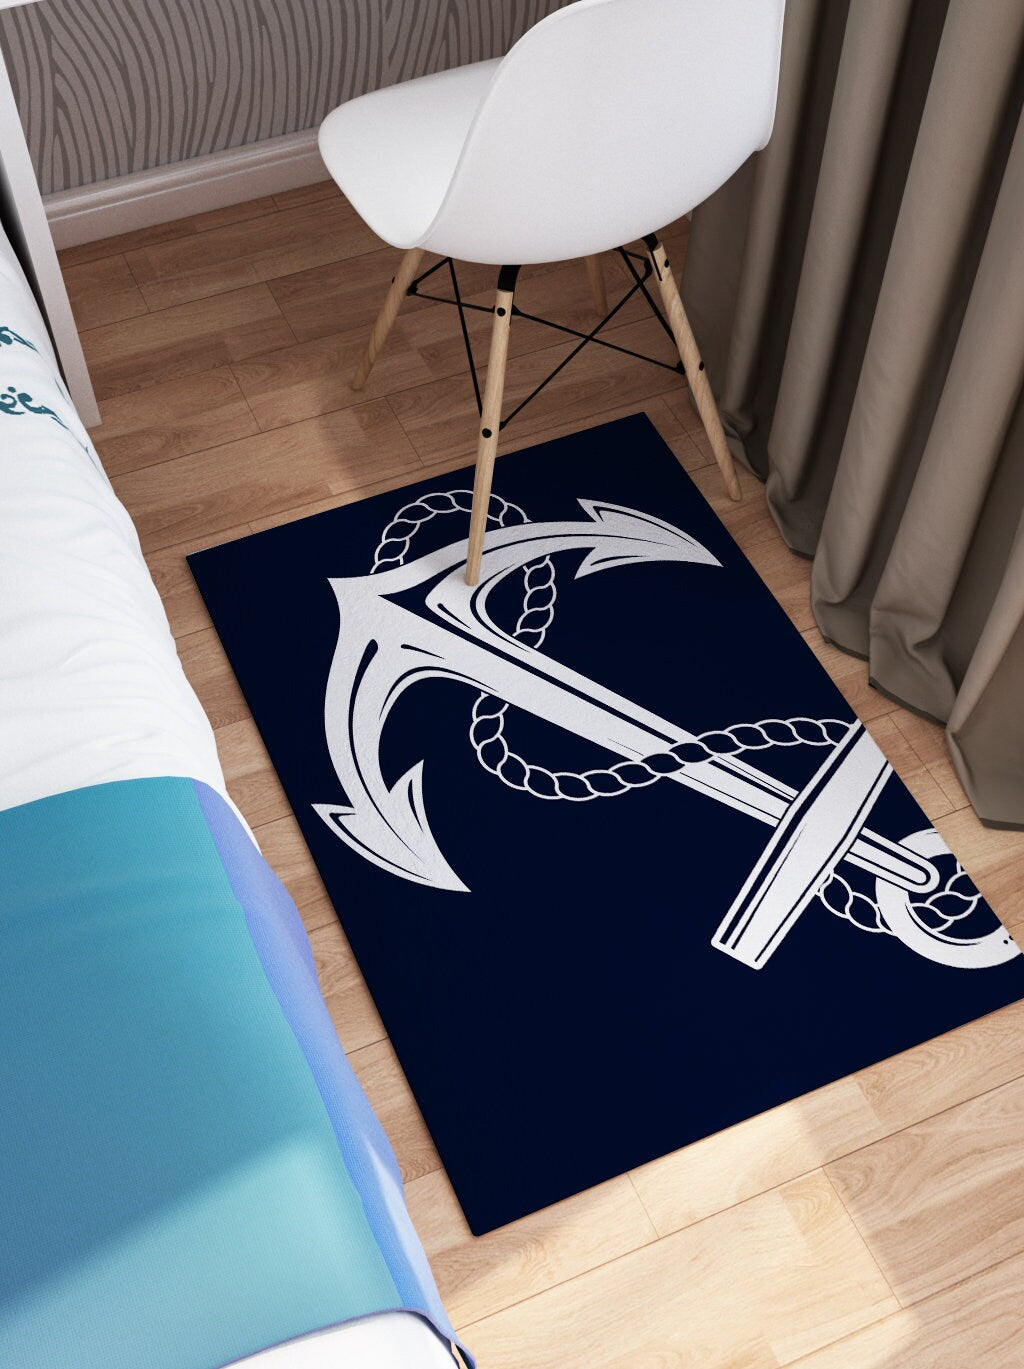 Anchor Rug nautical Rug boaters Rugs navy white Floor Rug beachy Rugs 3x5 4x6 5x7 5x8 8x10 Large rug beach decor anchors rope boating